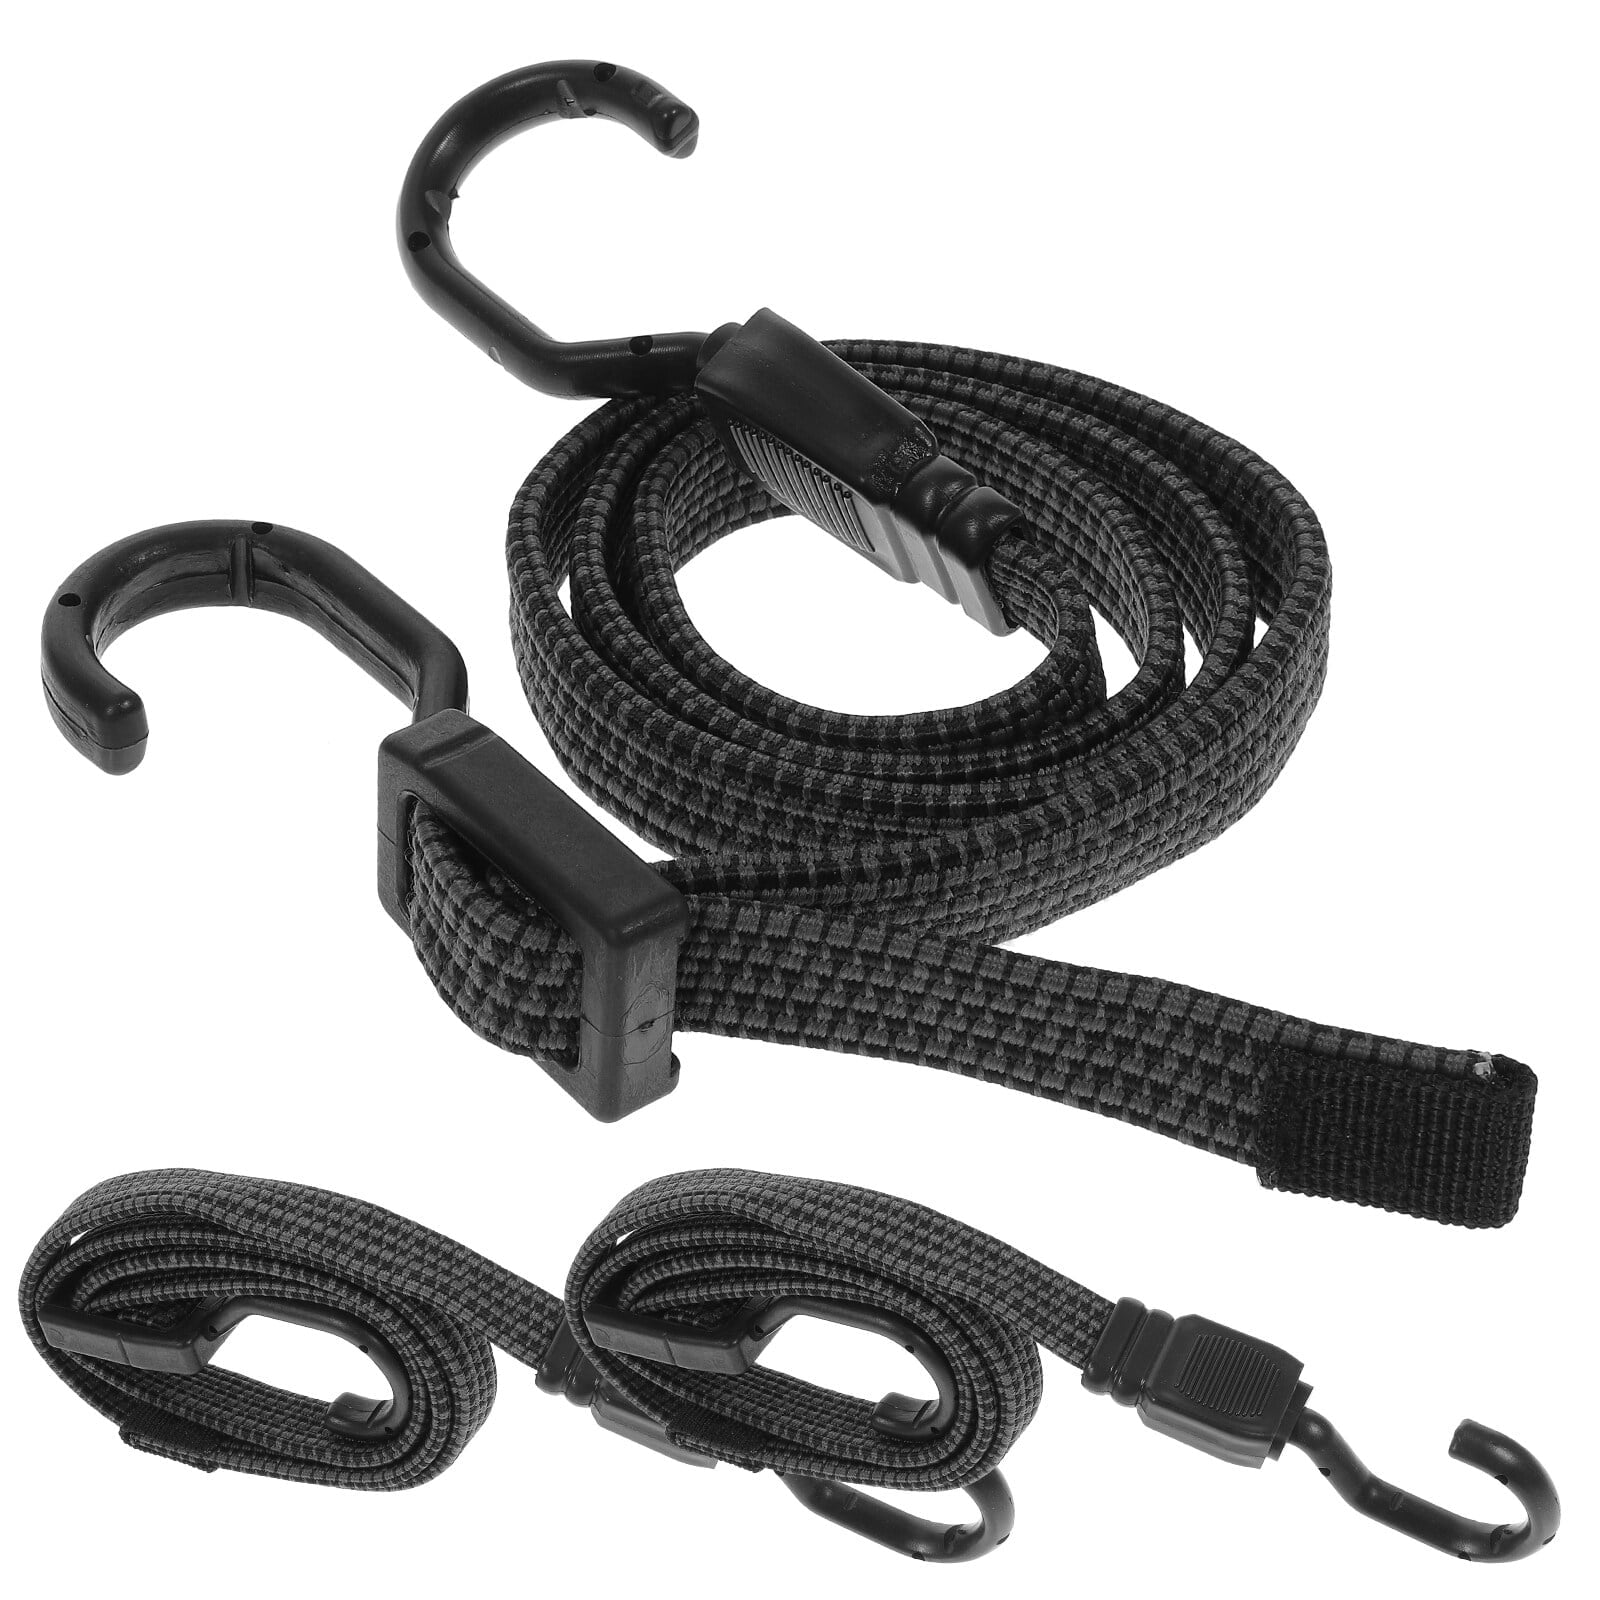 Pack of 10 heavy duty elastic bungee cords, luggage cord 30cm 